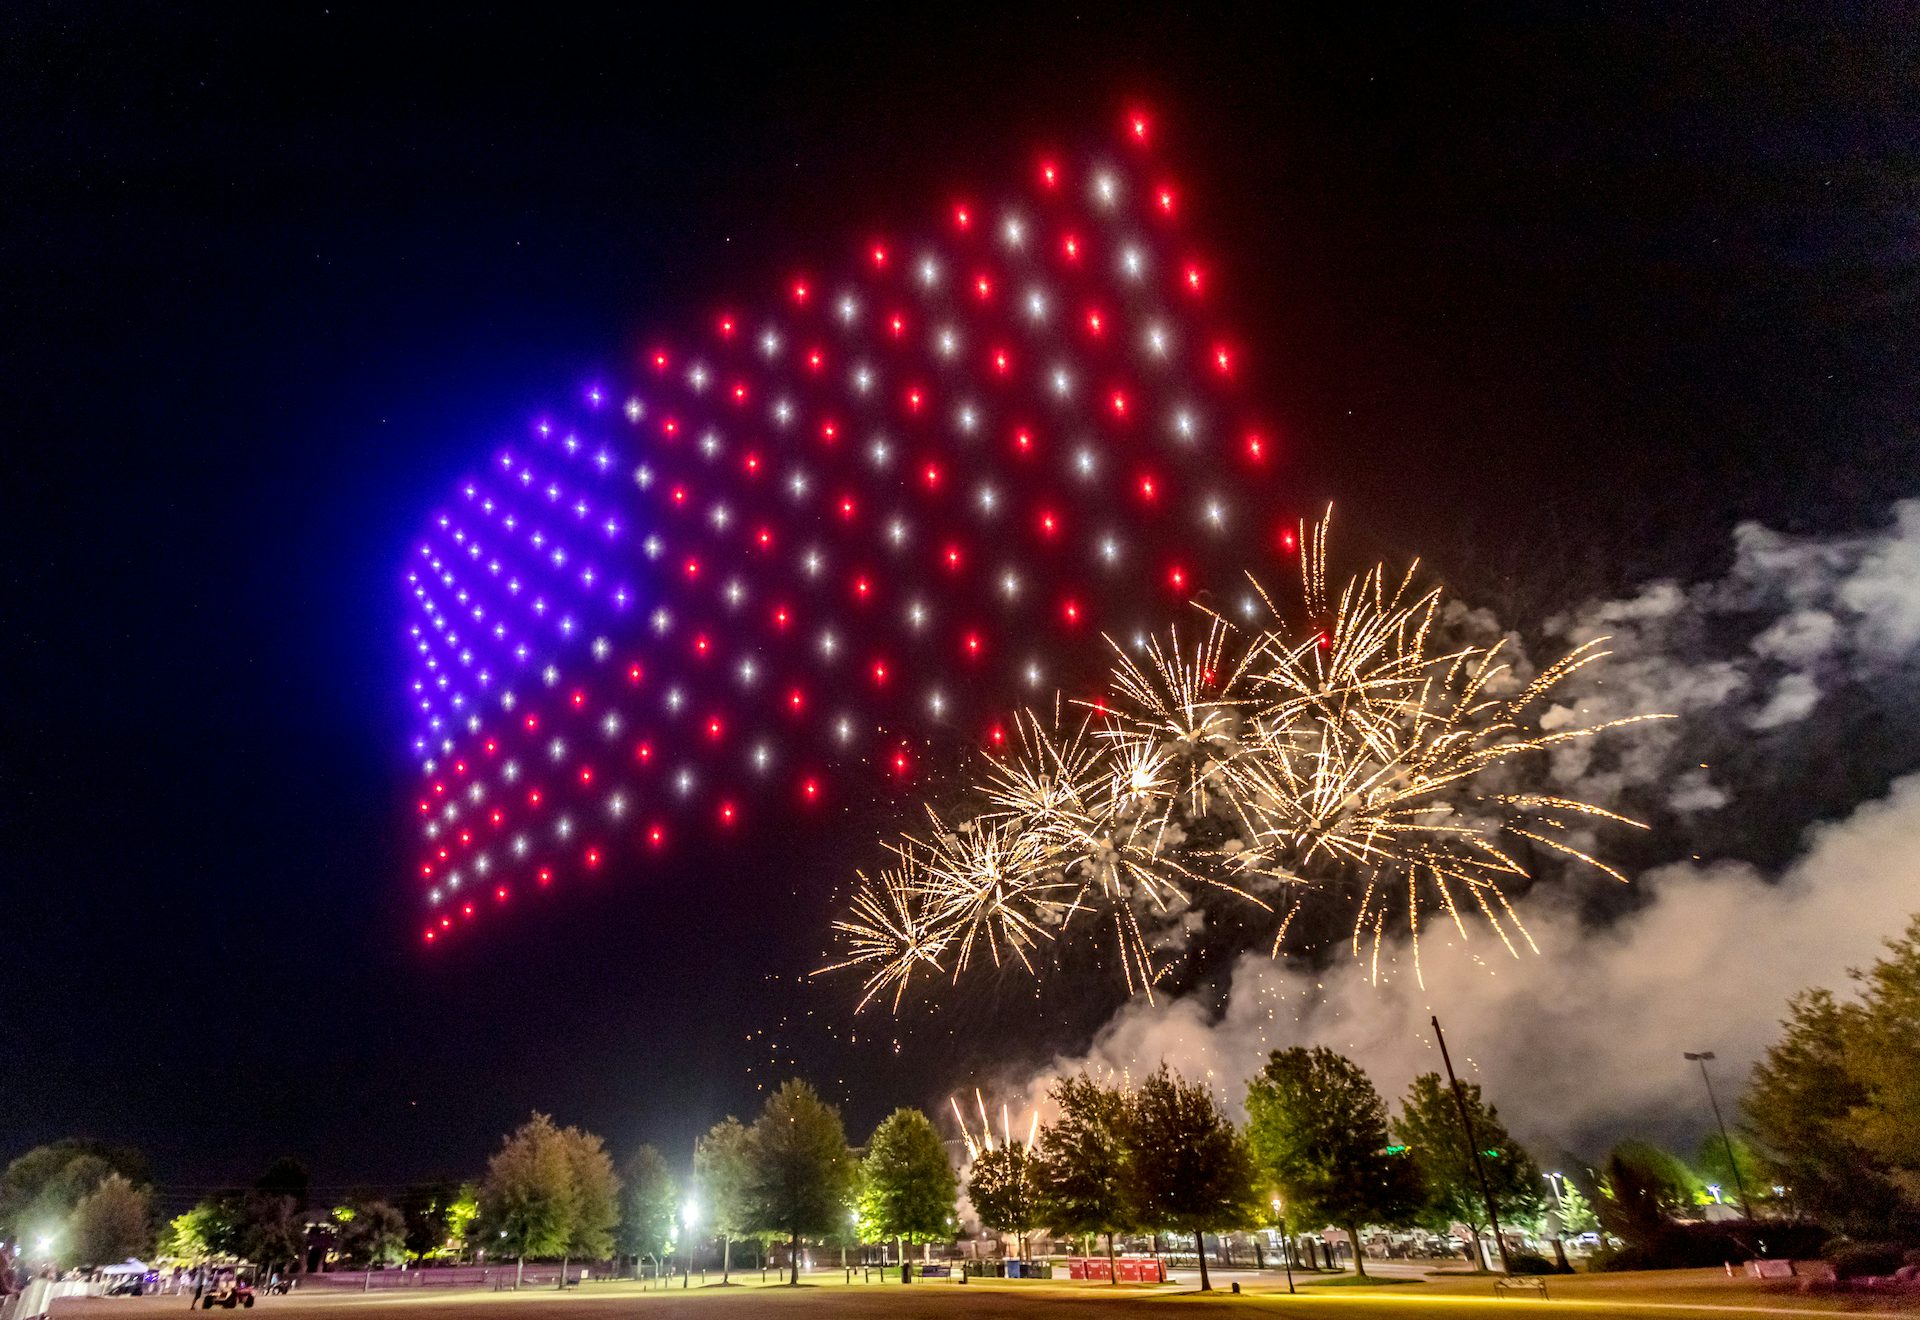 Verge Aero flies a drone show in coordination with fireworks in GA